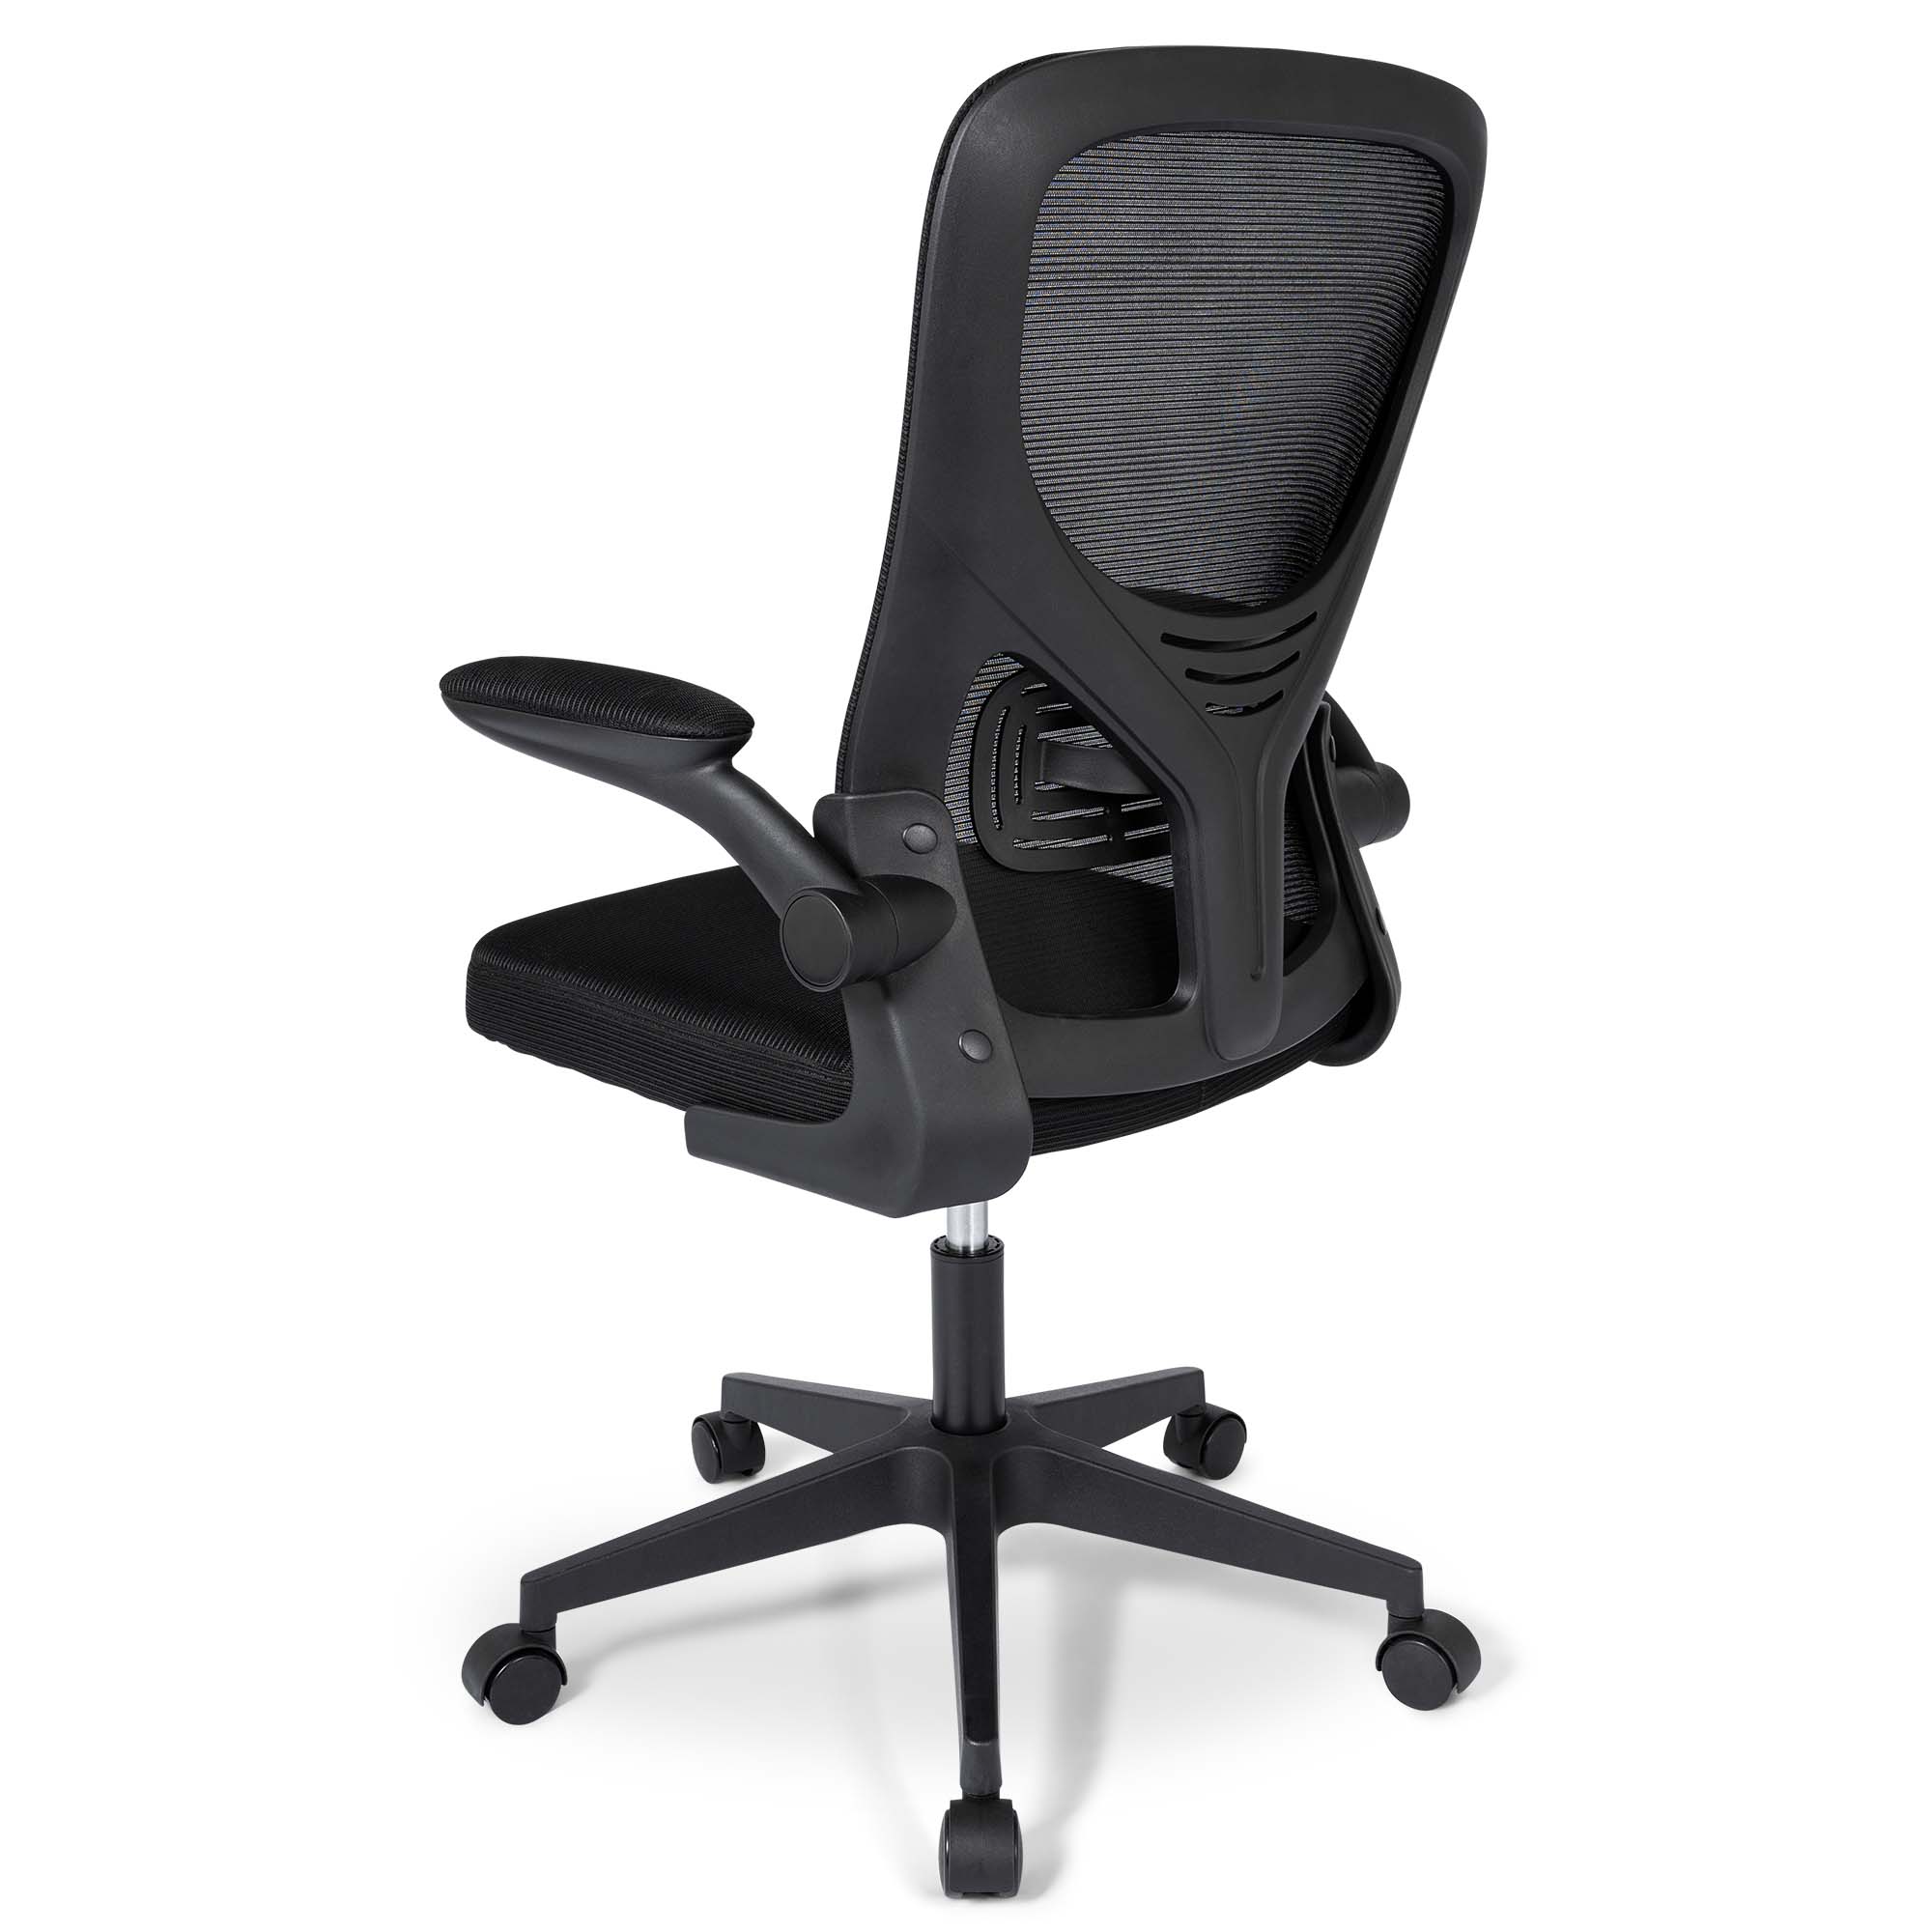 Ergodu Ergonomic Office Chair with Foldable Armrests back view